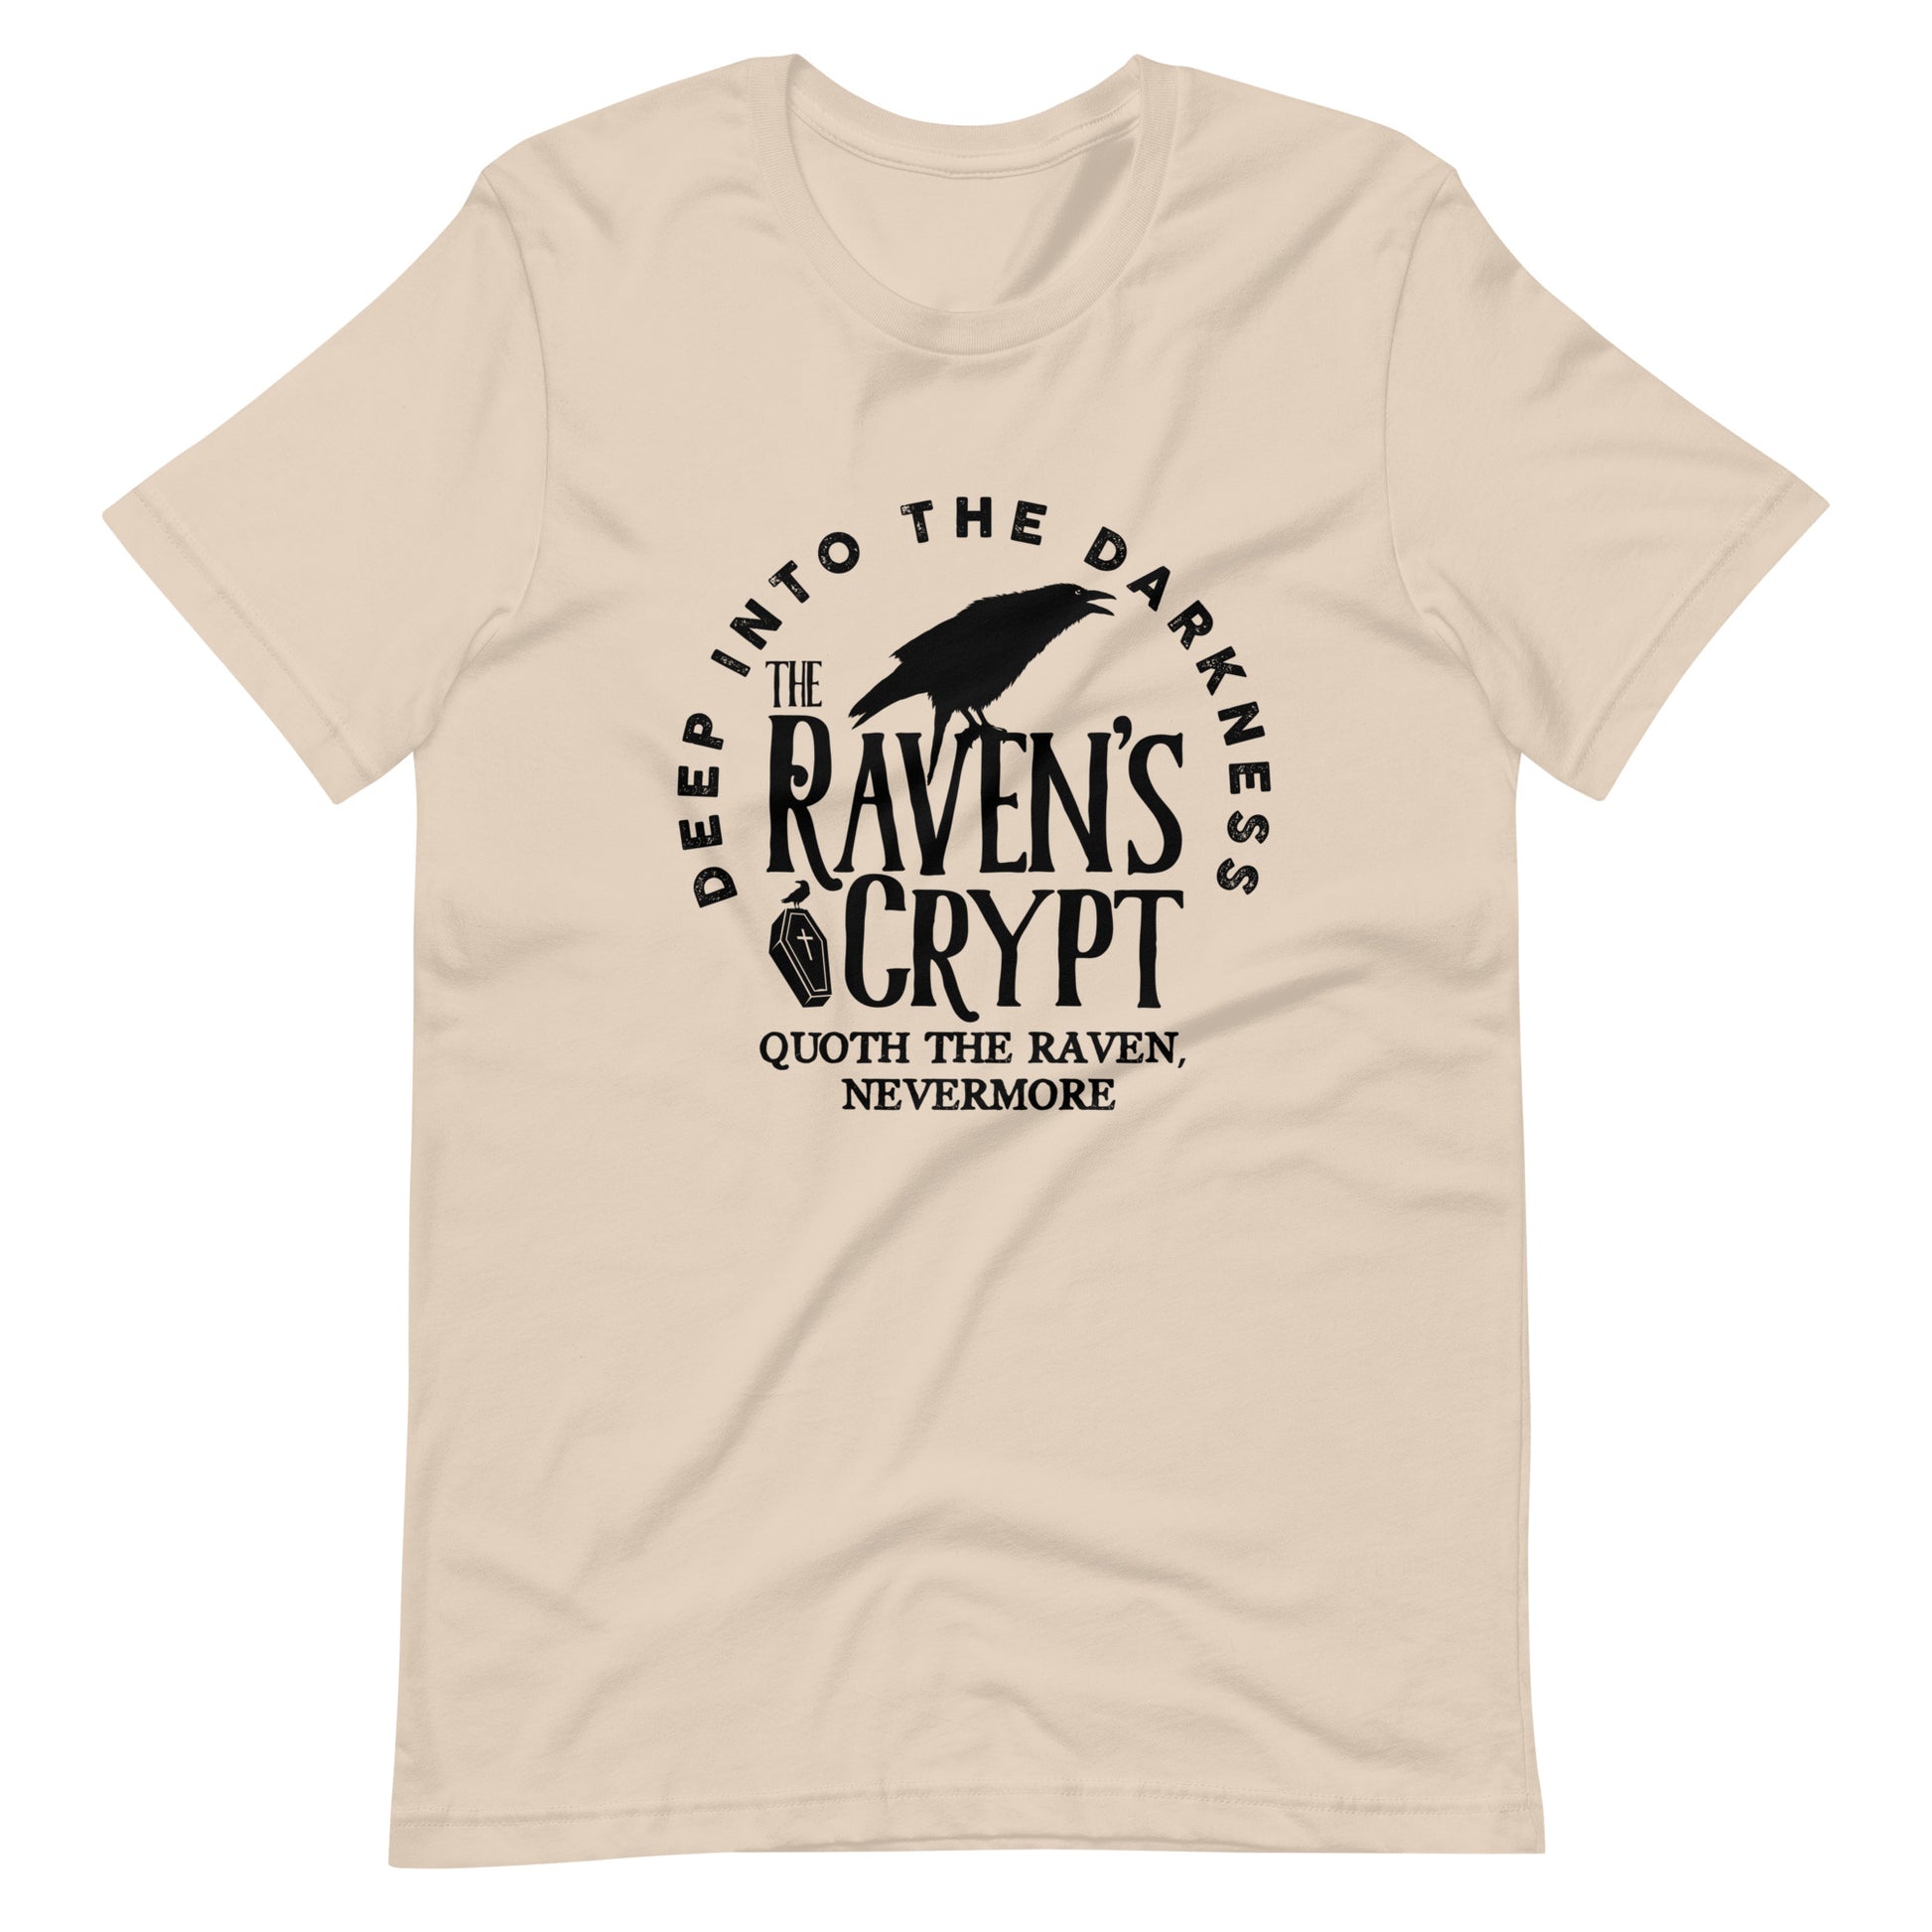 Deep Into the Darkness The Raven's Crypt - Men's t-shirt - Soft Cream Front